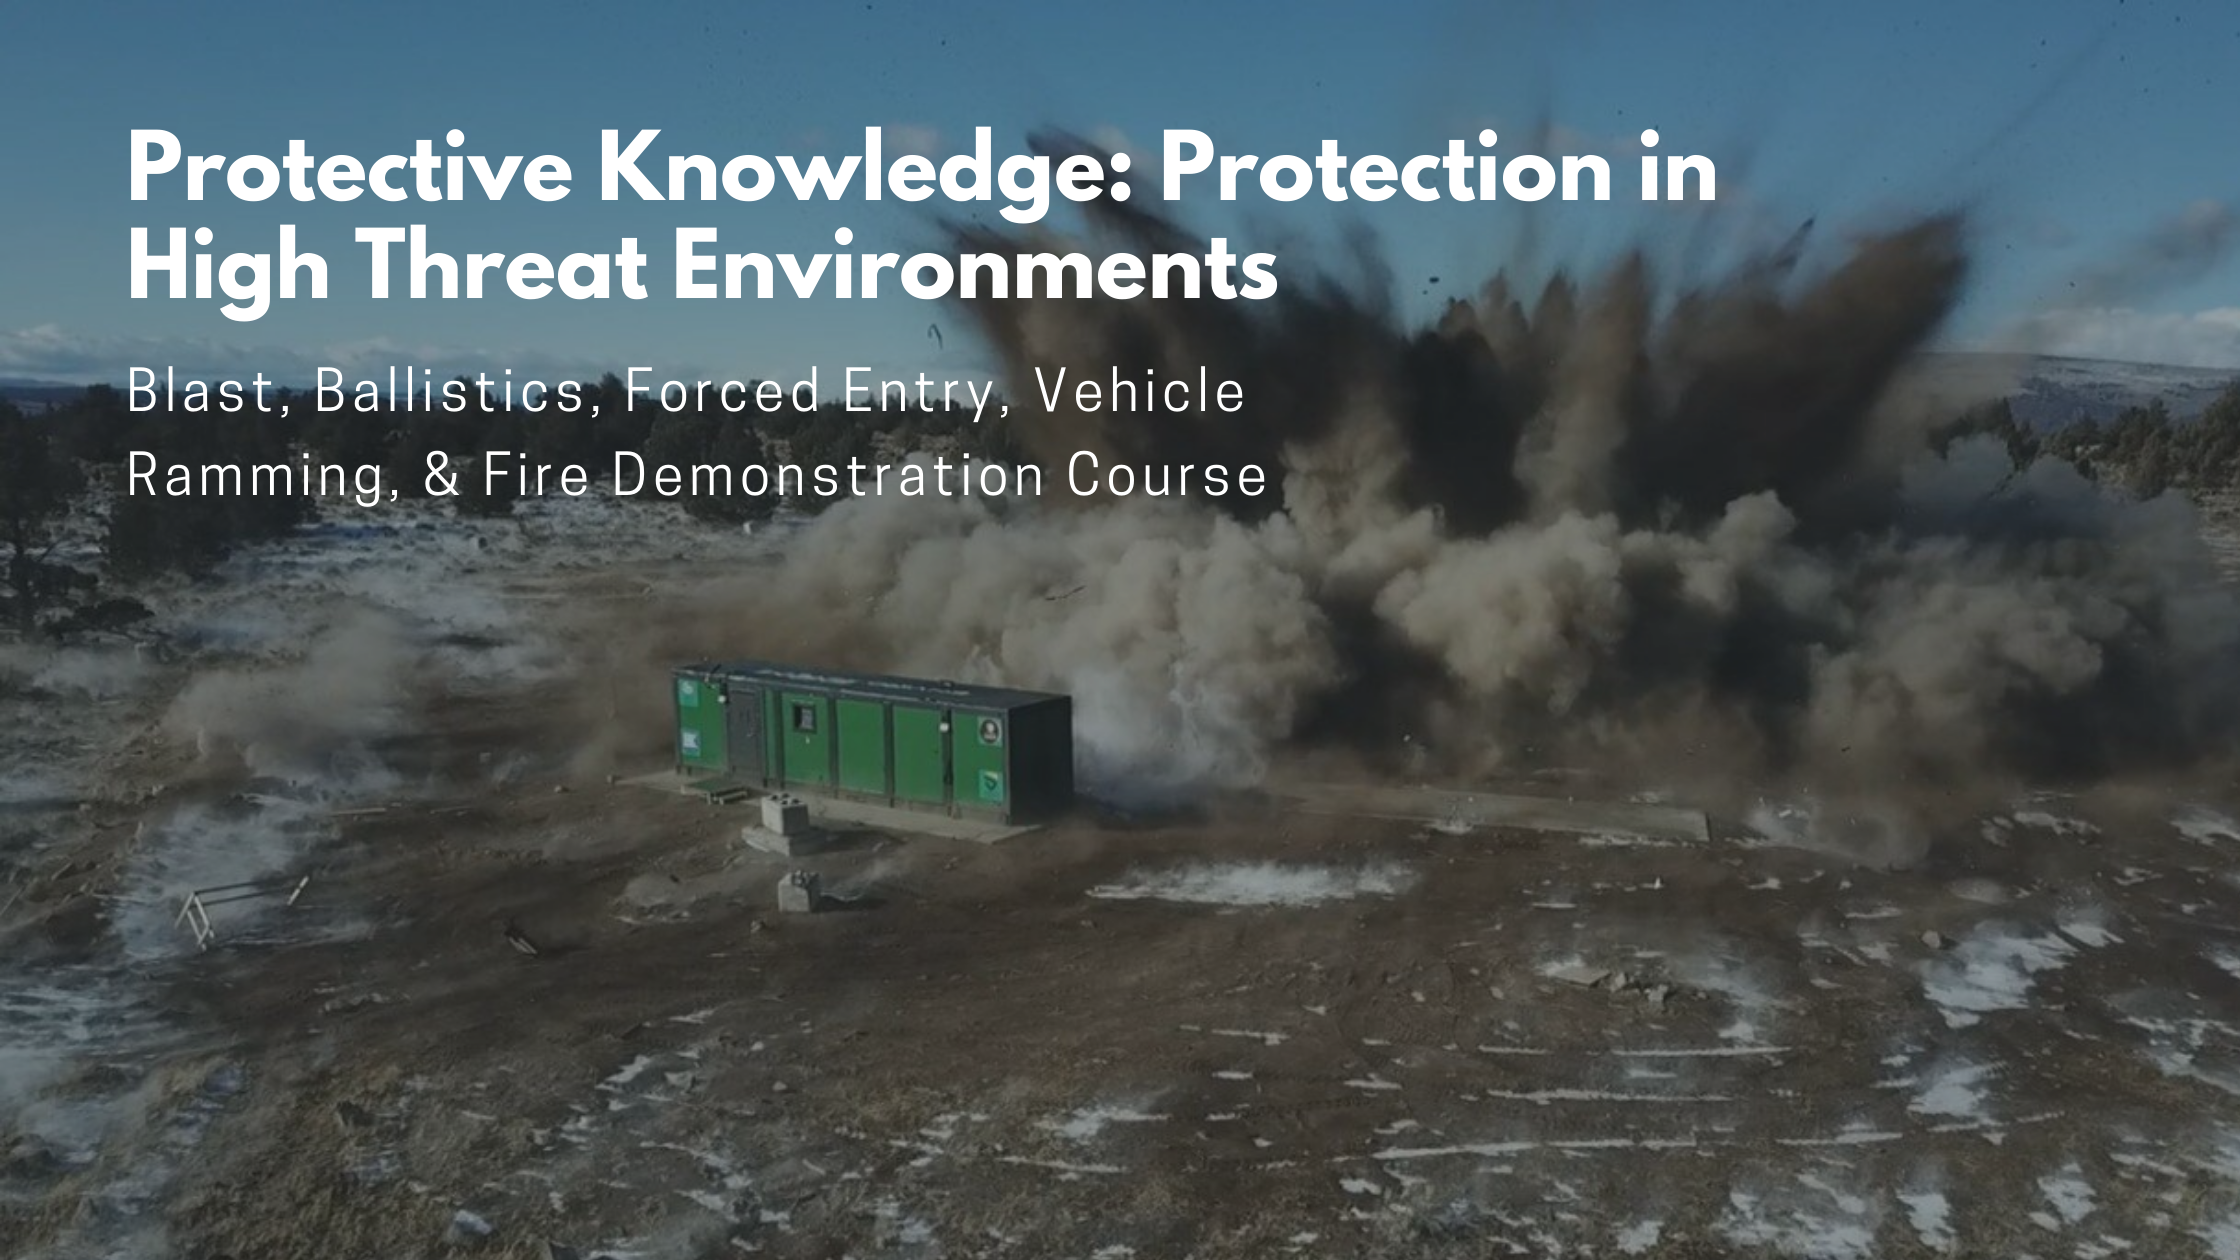 Protective Knowledge: Protection in High Threat Environments